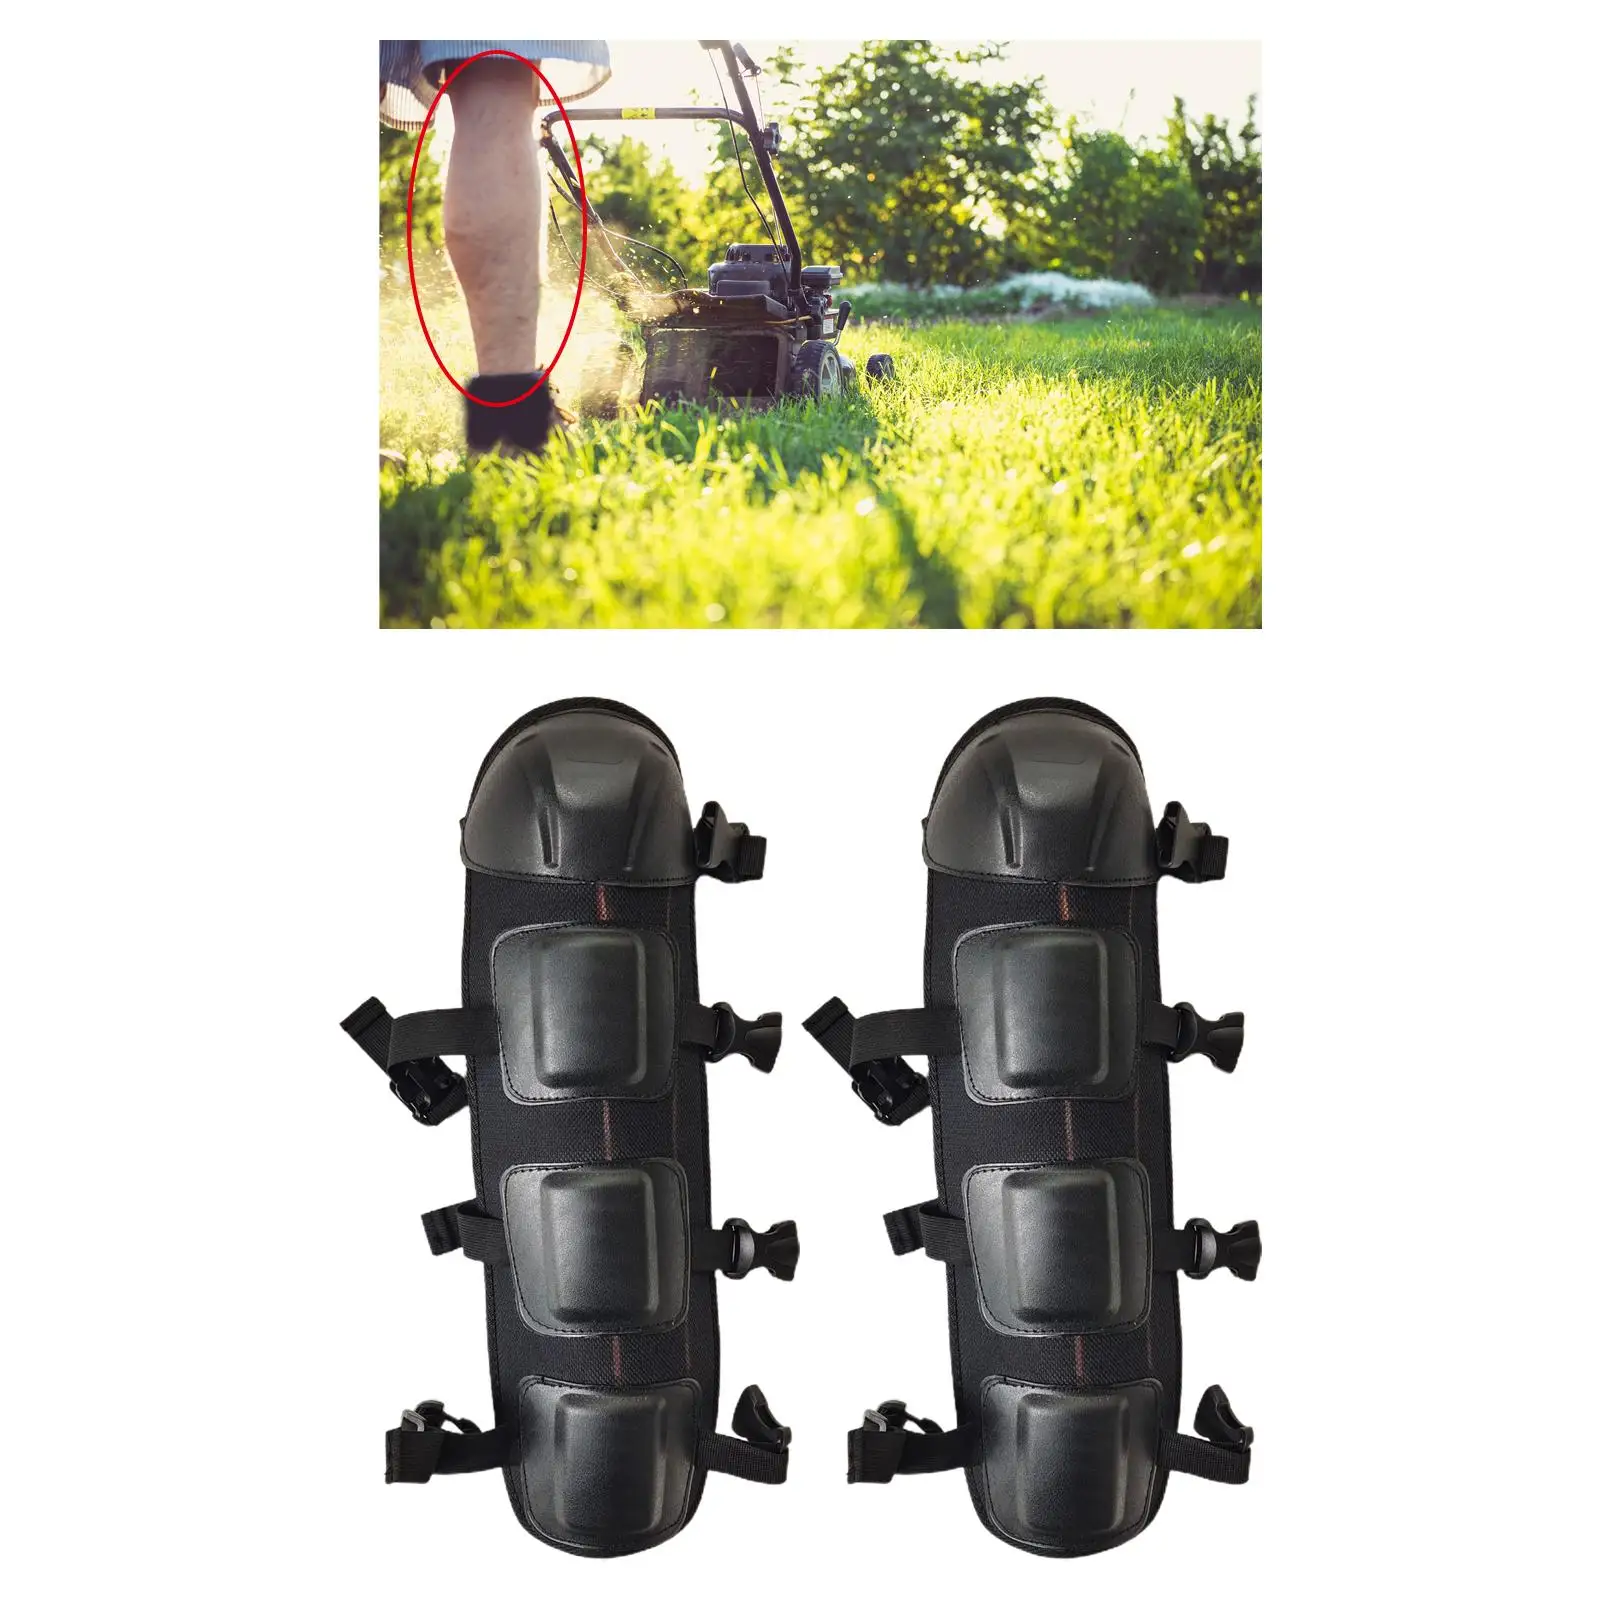 Work Knee Pads Kneelet Protective Gear for Construction Mountain Bikes Home